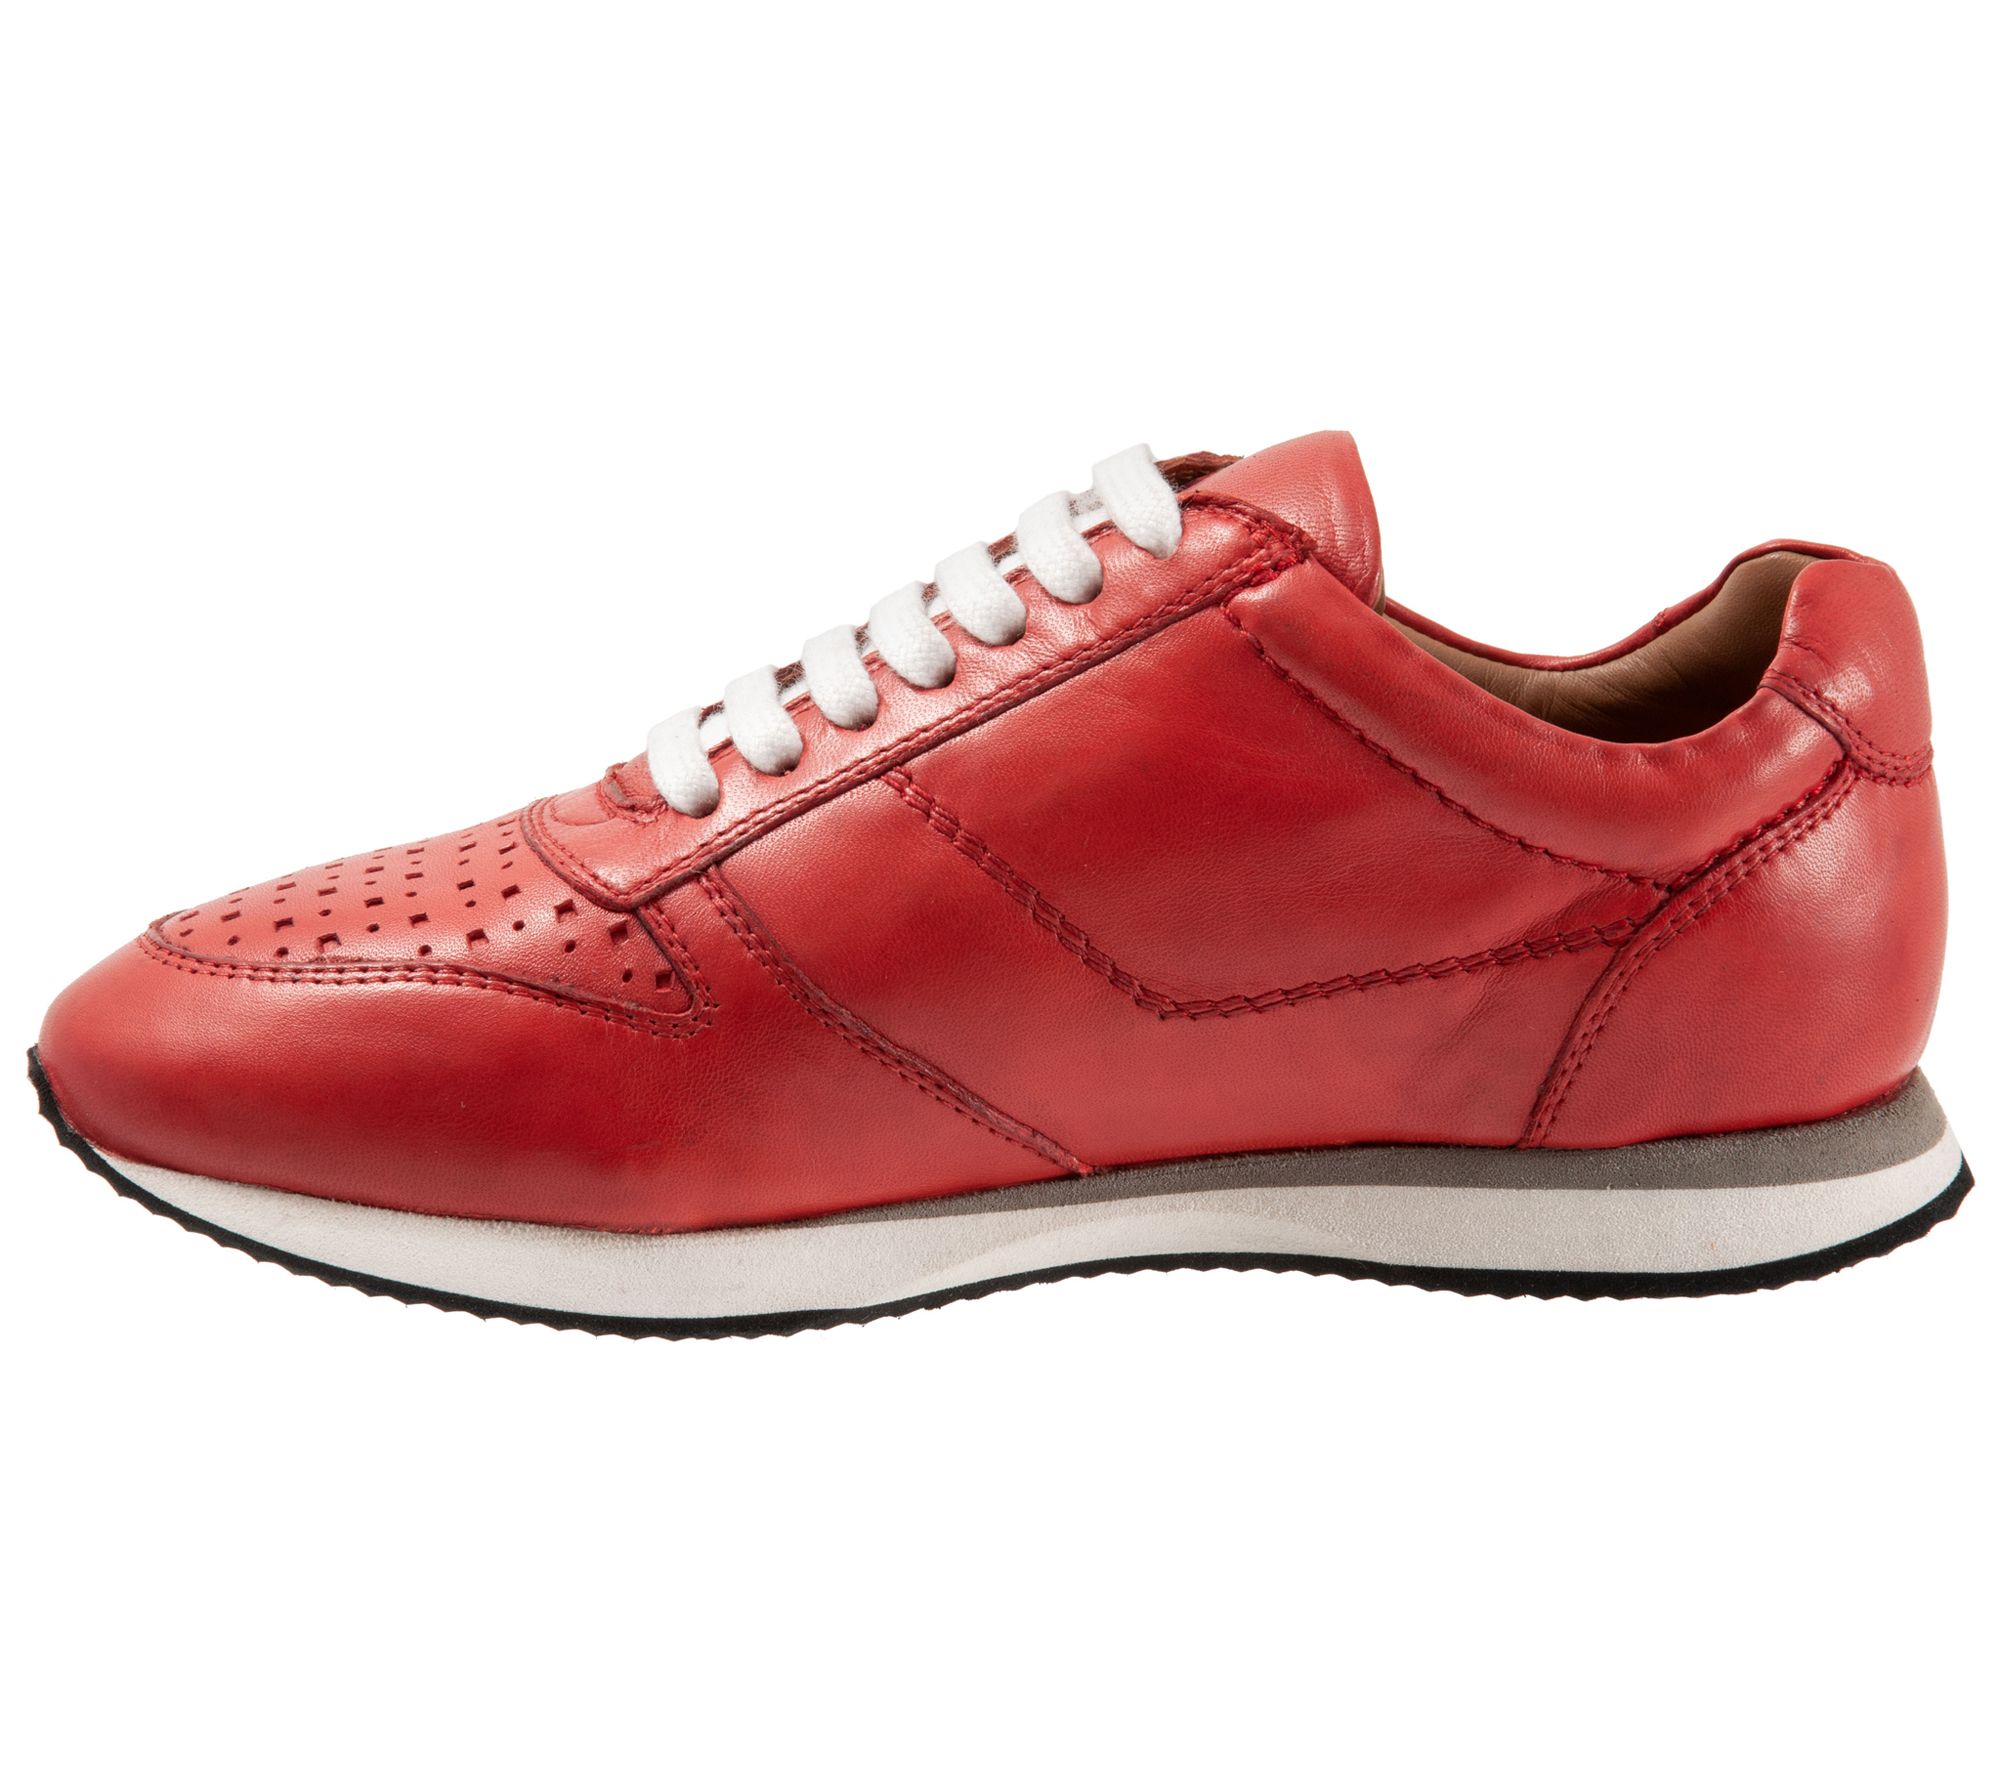 Trotters Lace-Up Leather Sneakers - Infinity - QVC.com